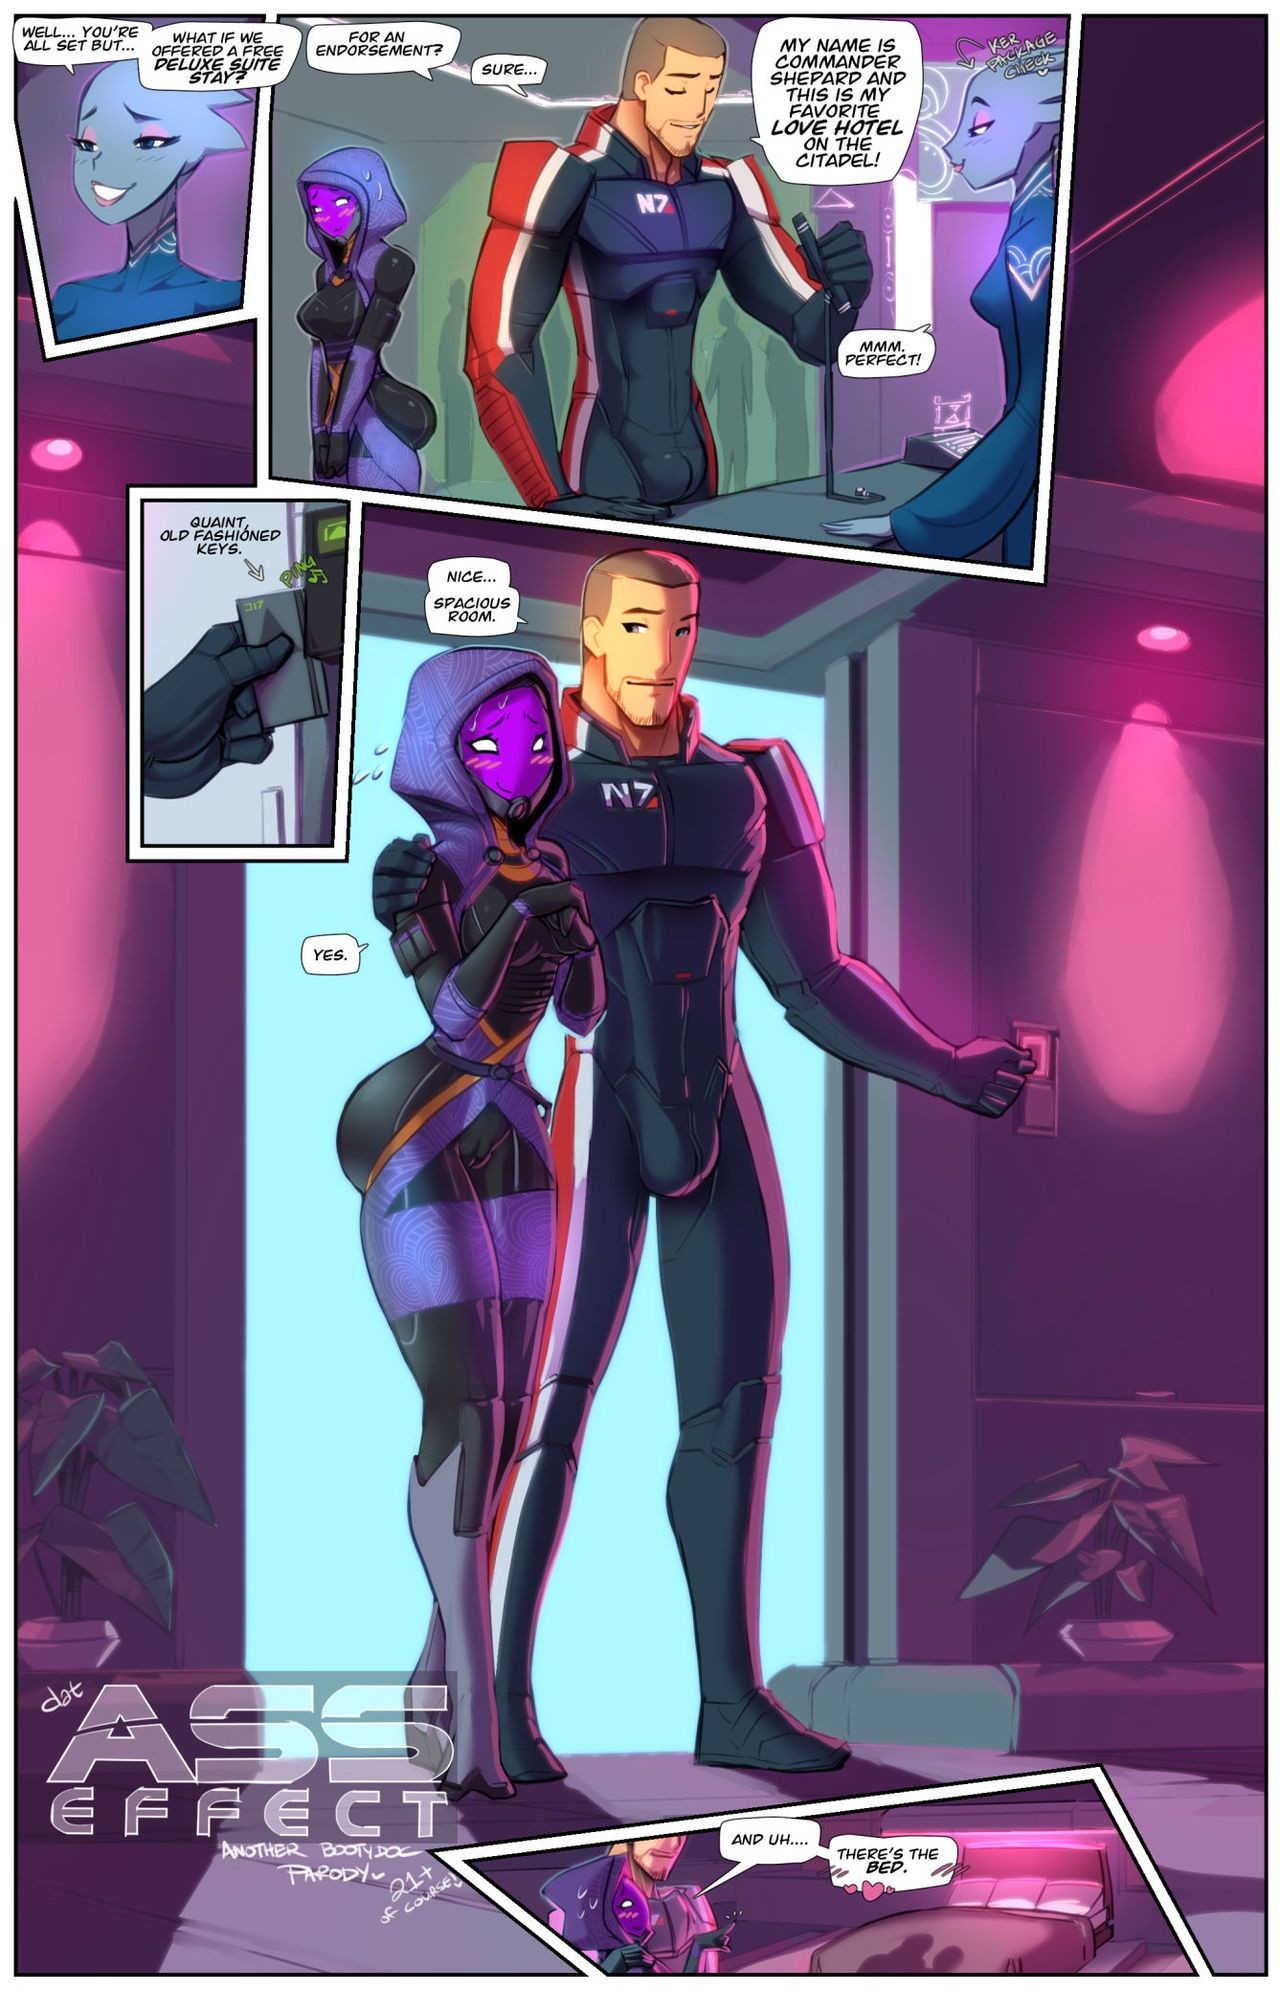 Passion (Fred Perry) Mass Effect - Dat ASS Effect (Ongoing) Sexcam